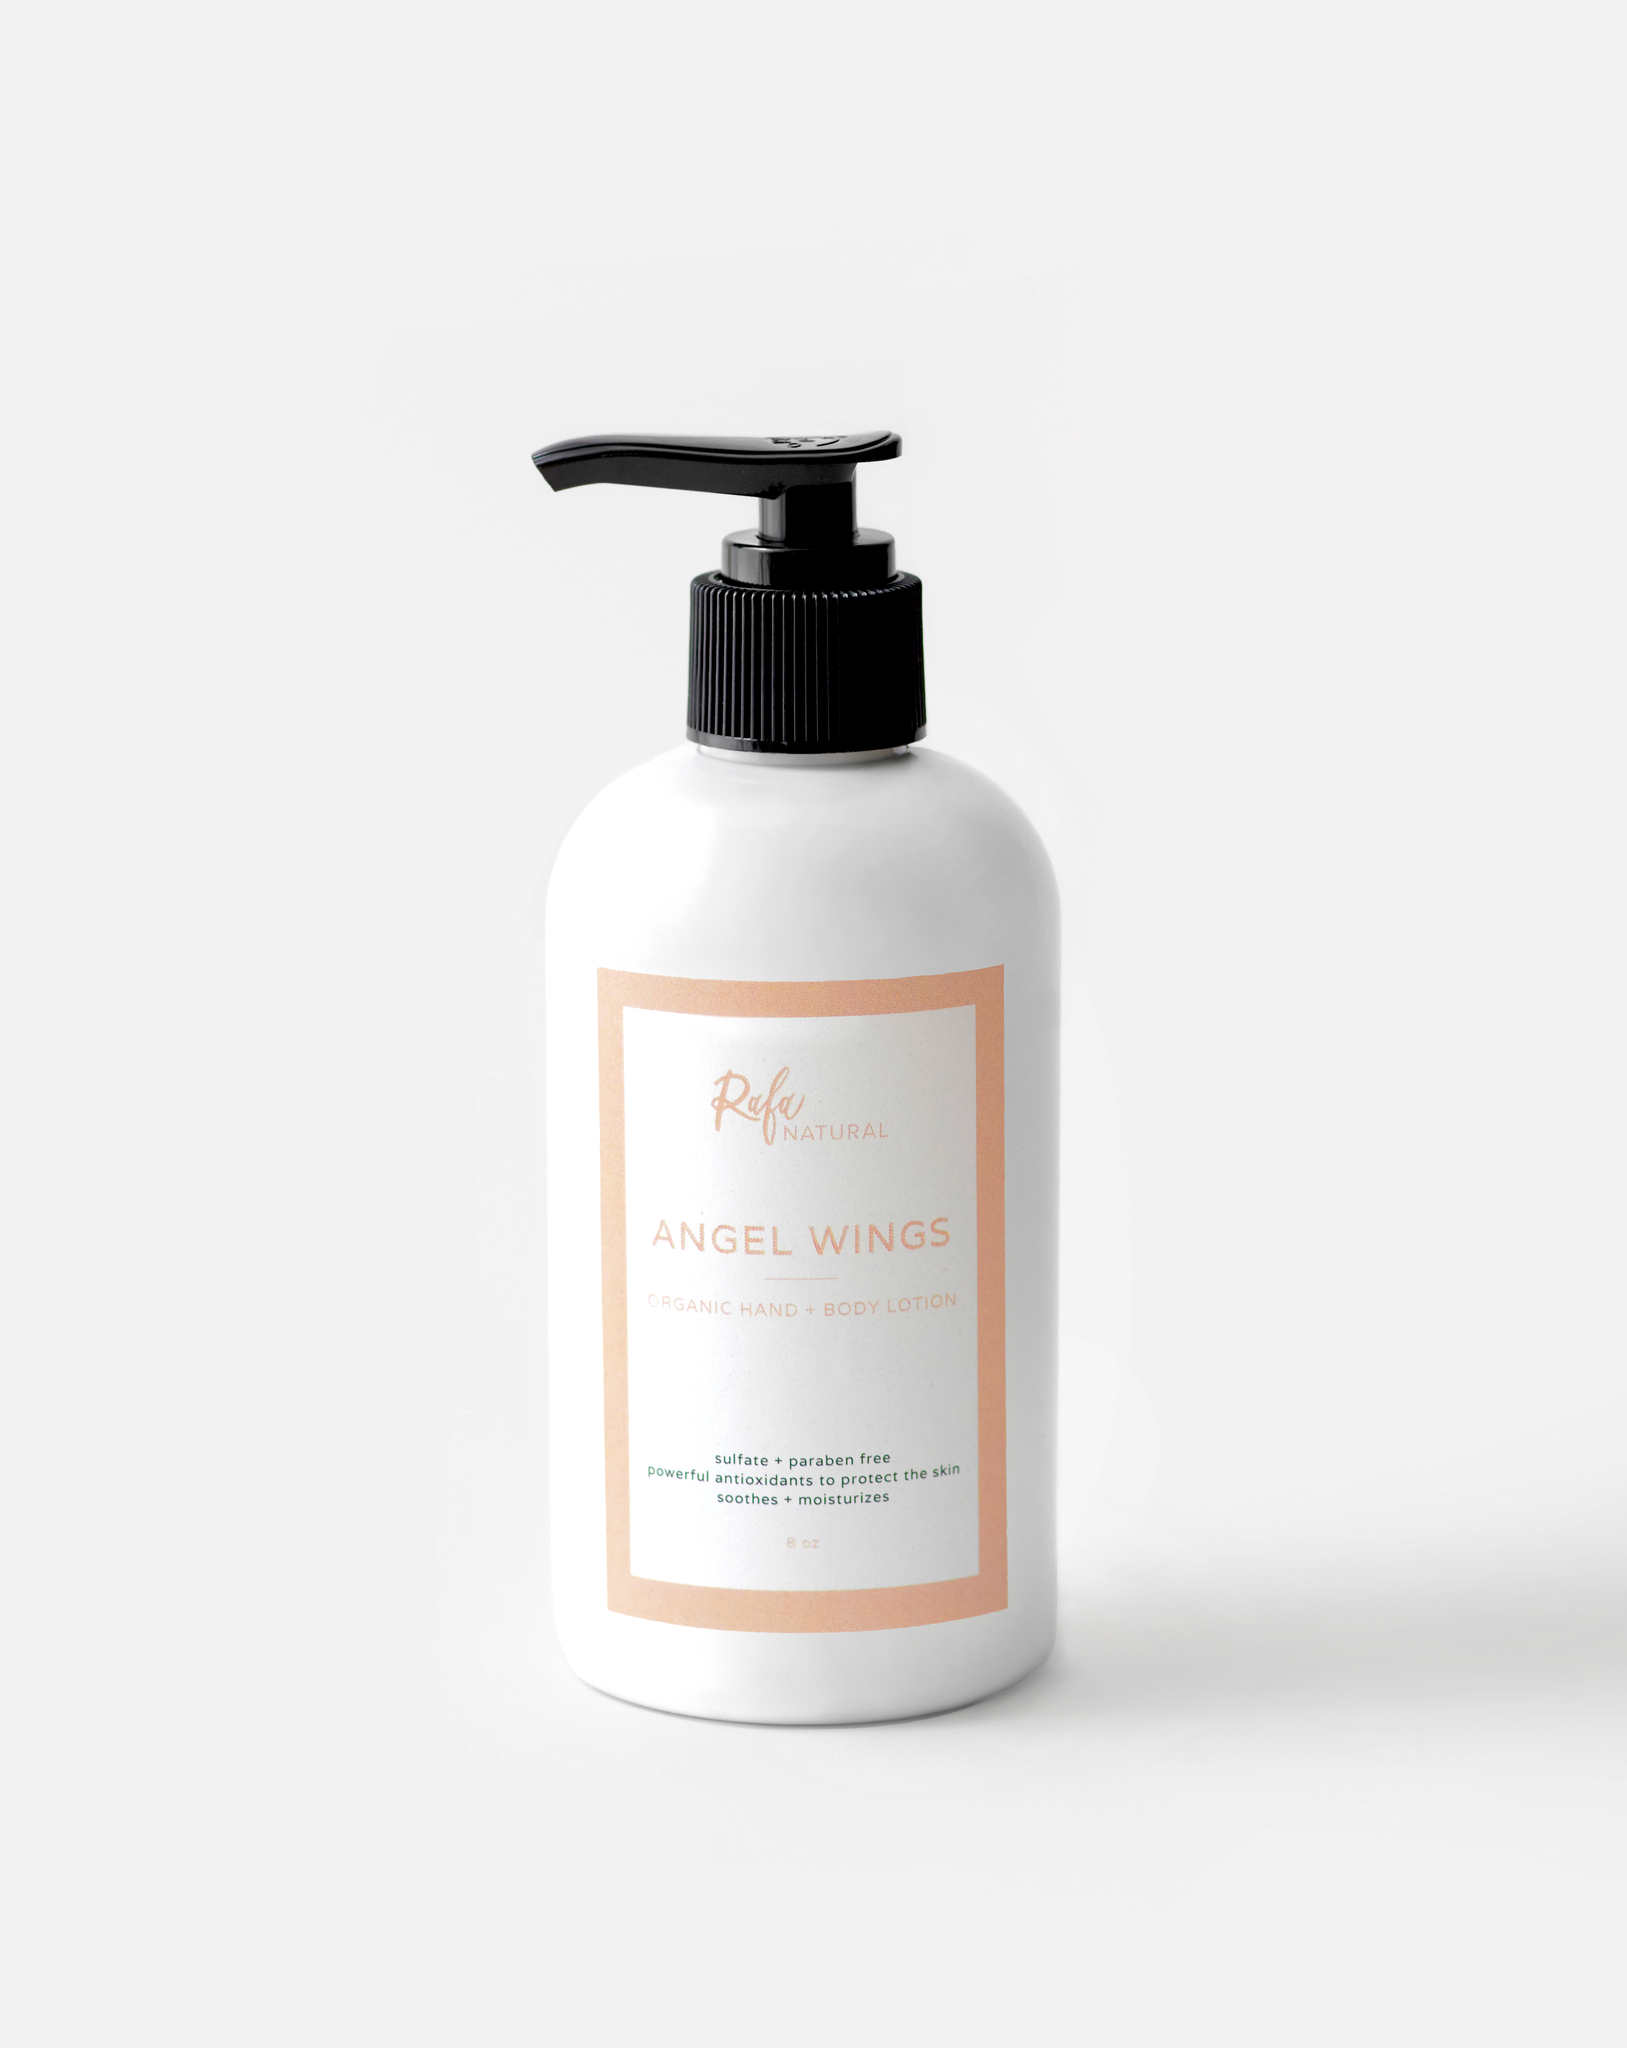 8oz. Bottle of Angel Wings Organic Hand + Body Lotion by Rafa Natural